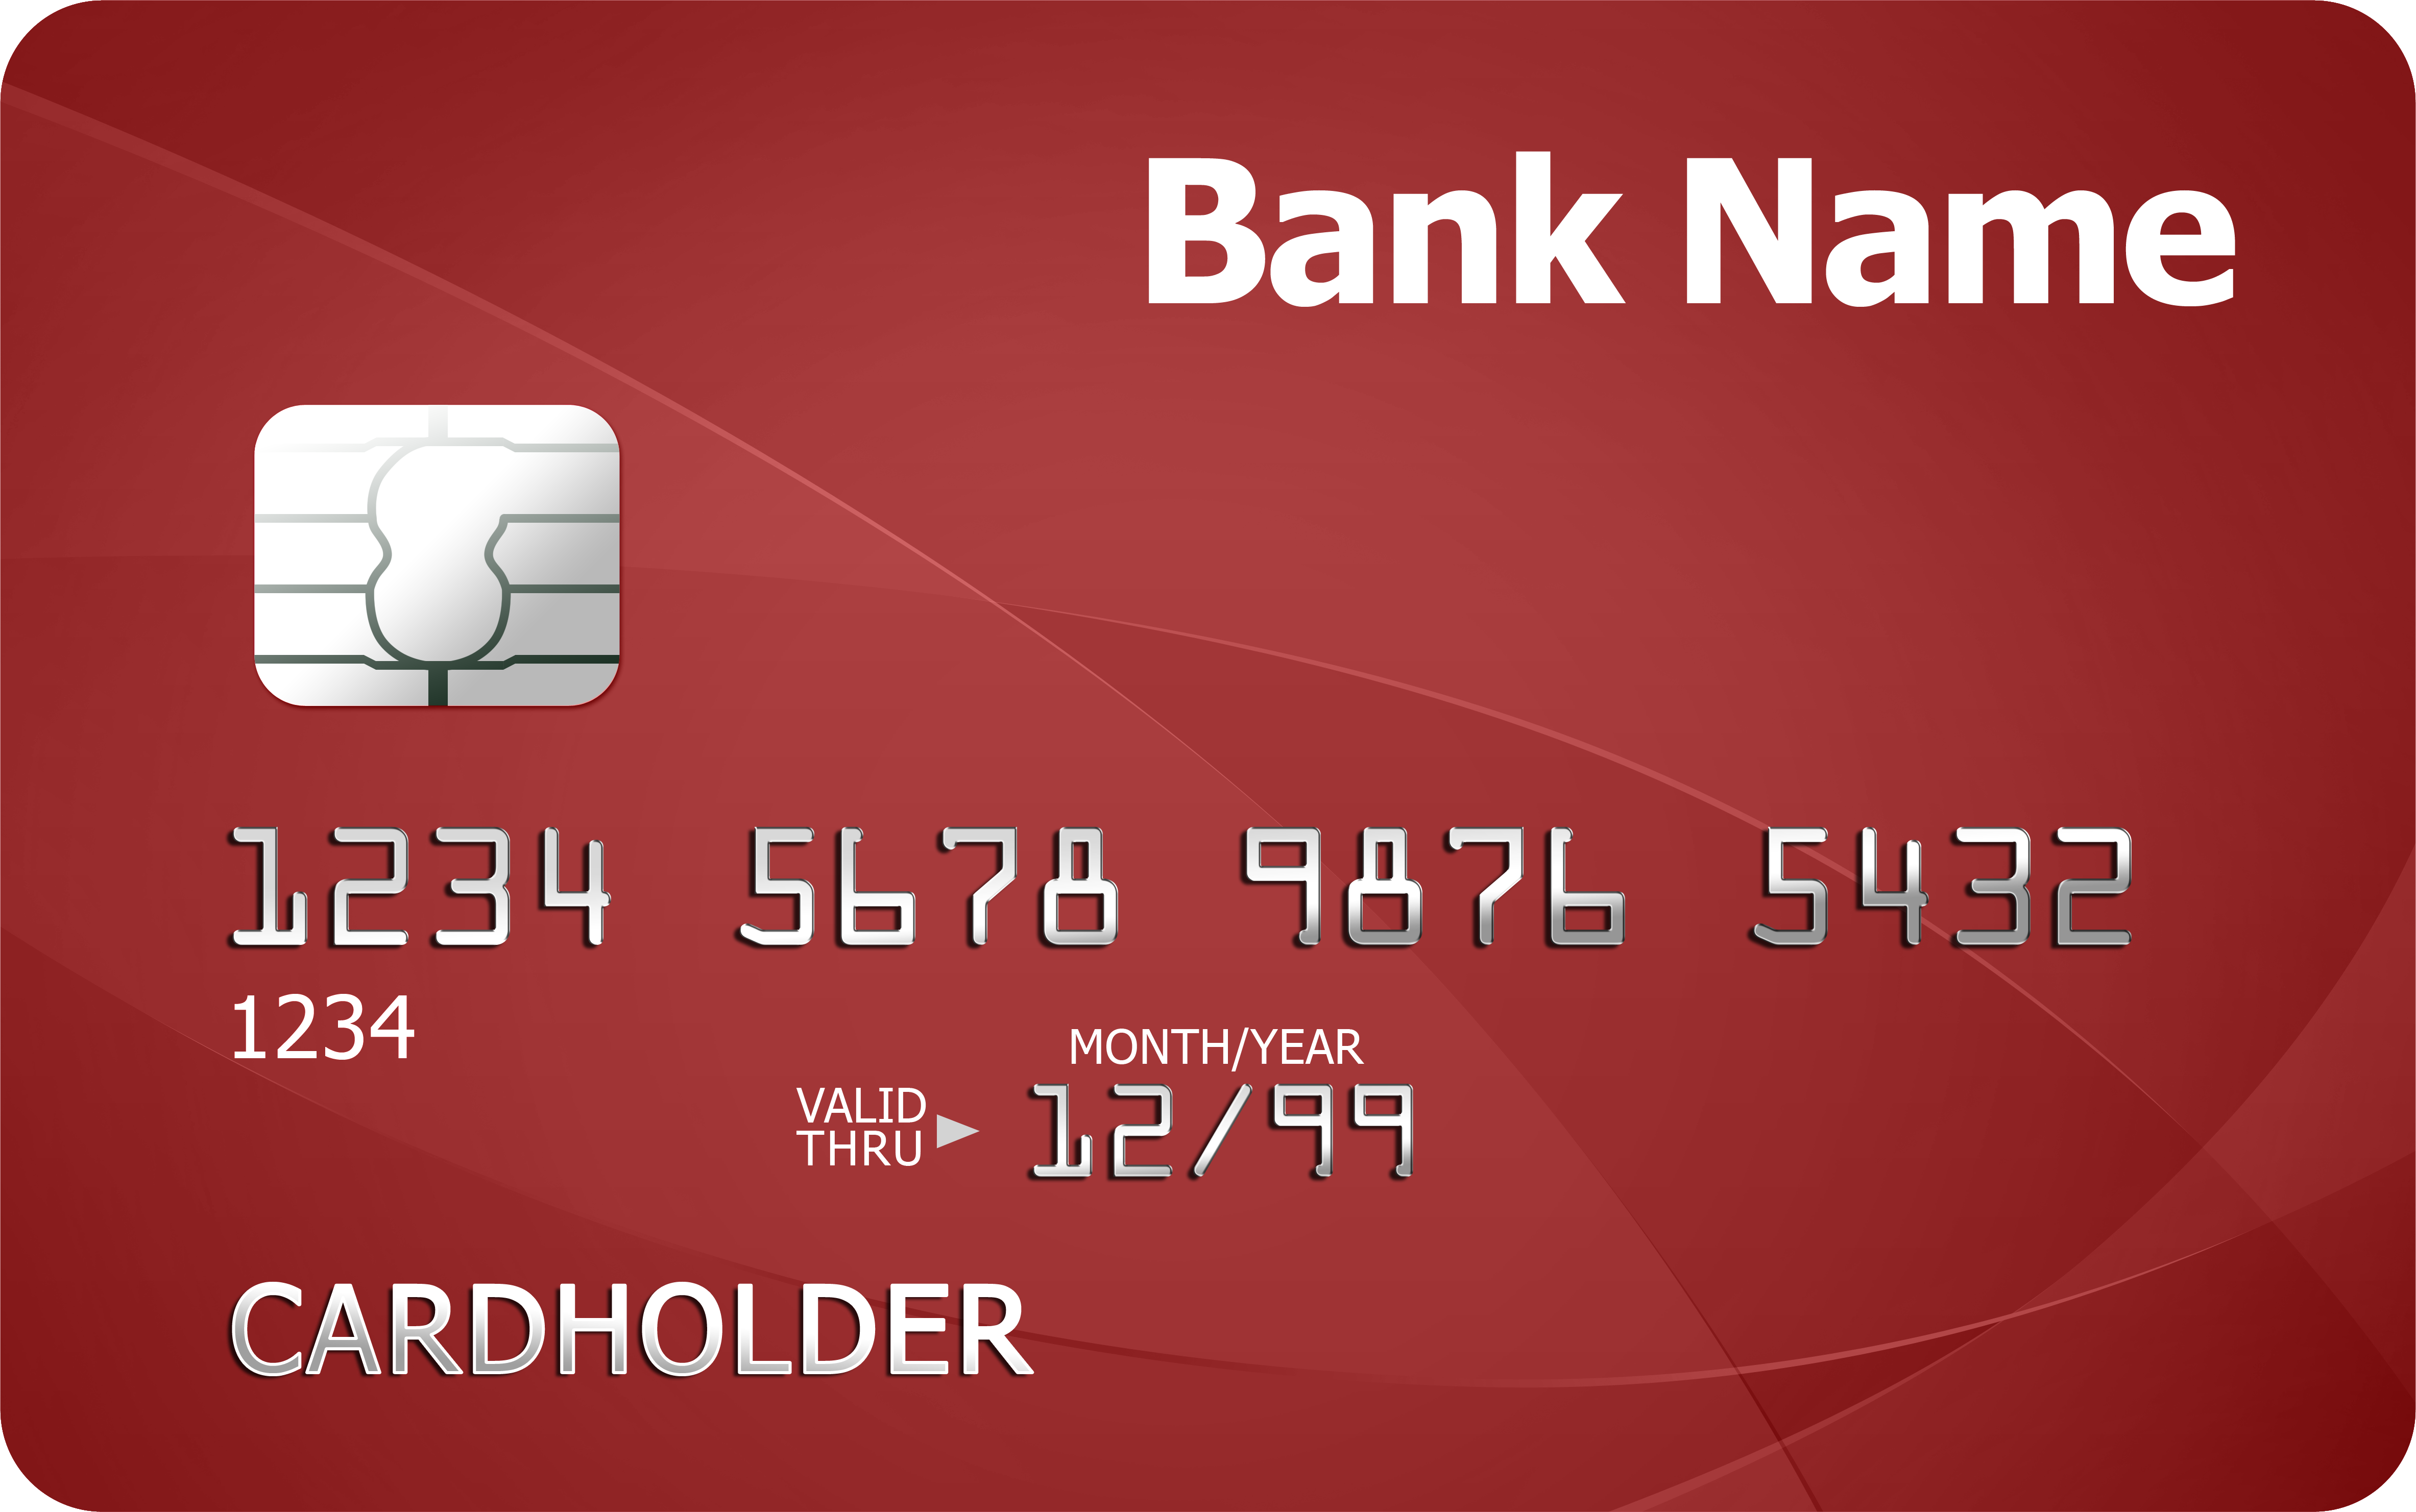 Network Security Accredit Card Lender PNG